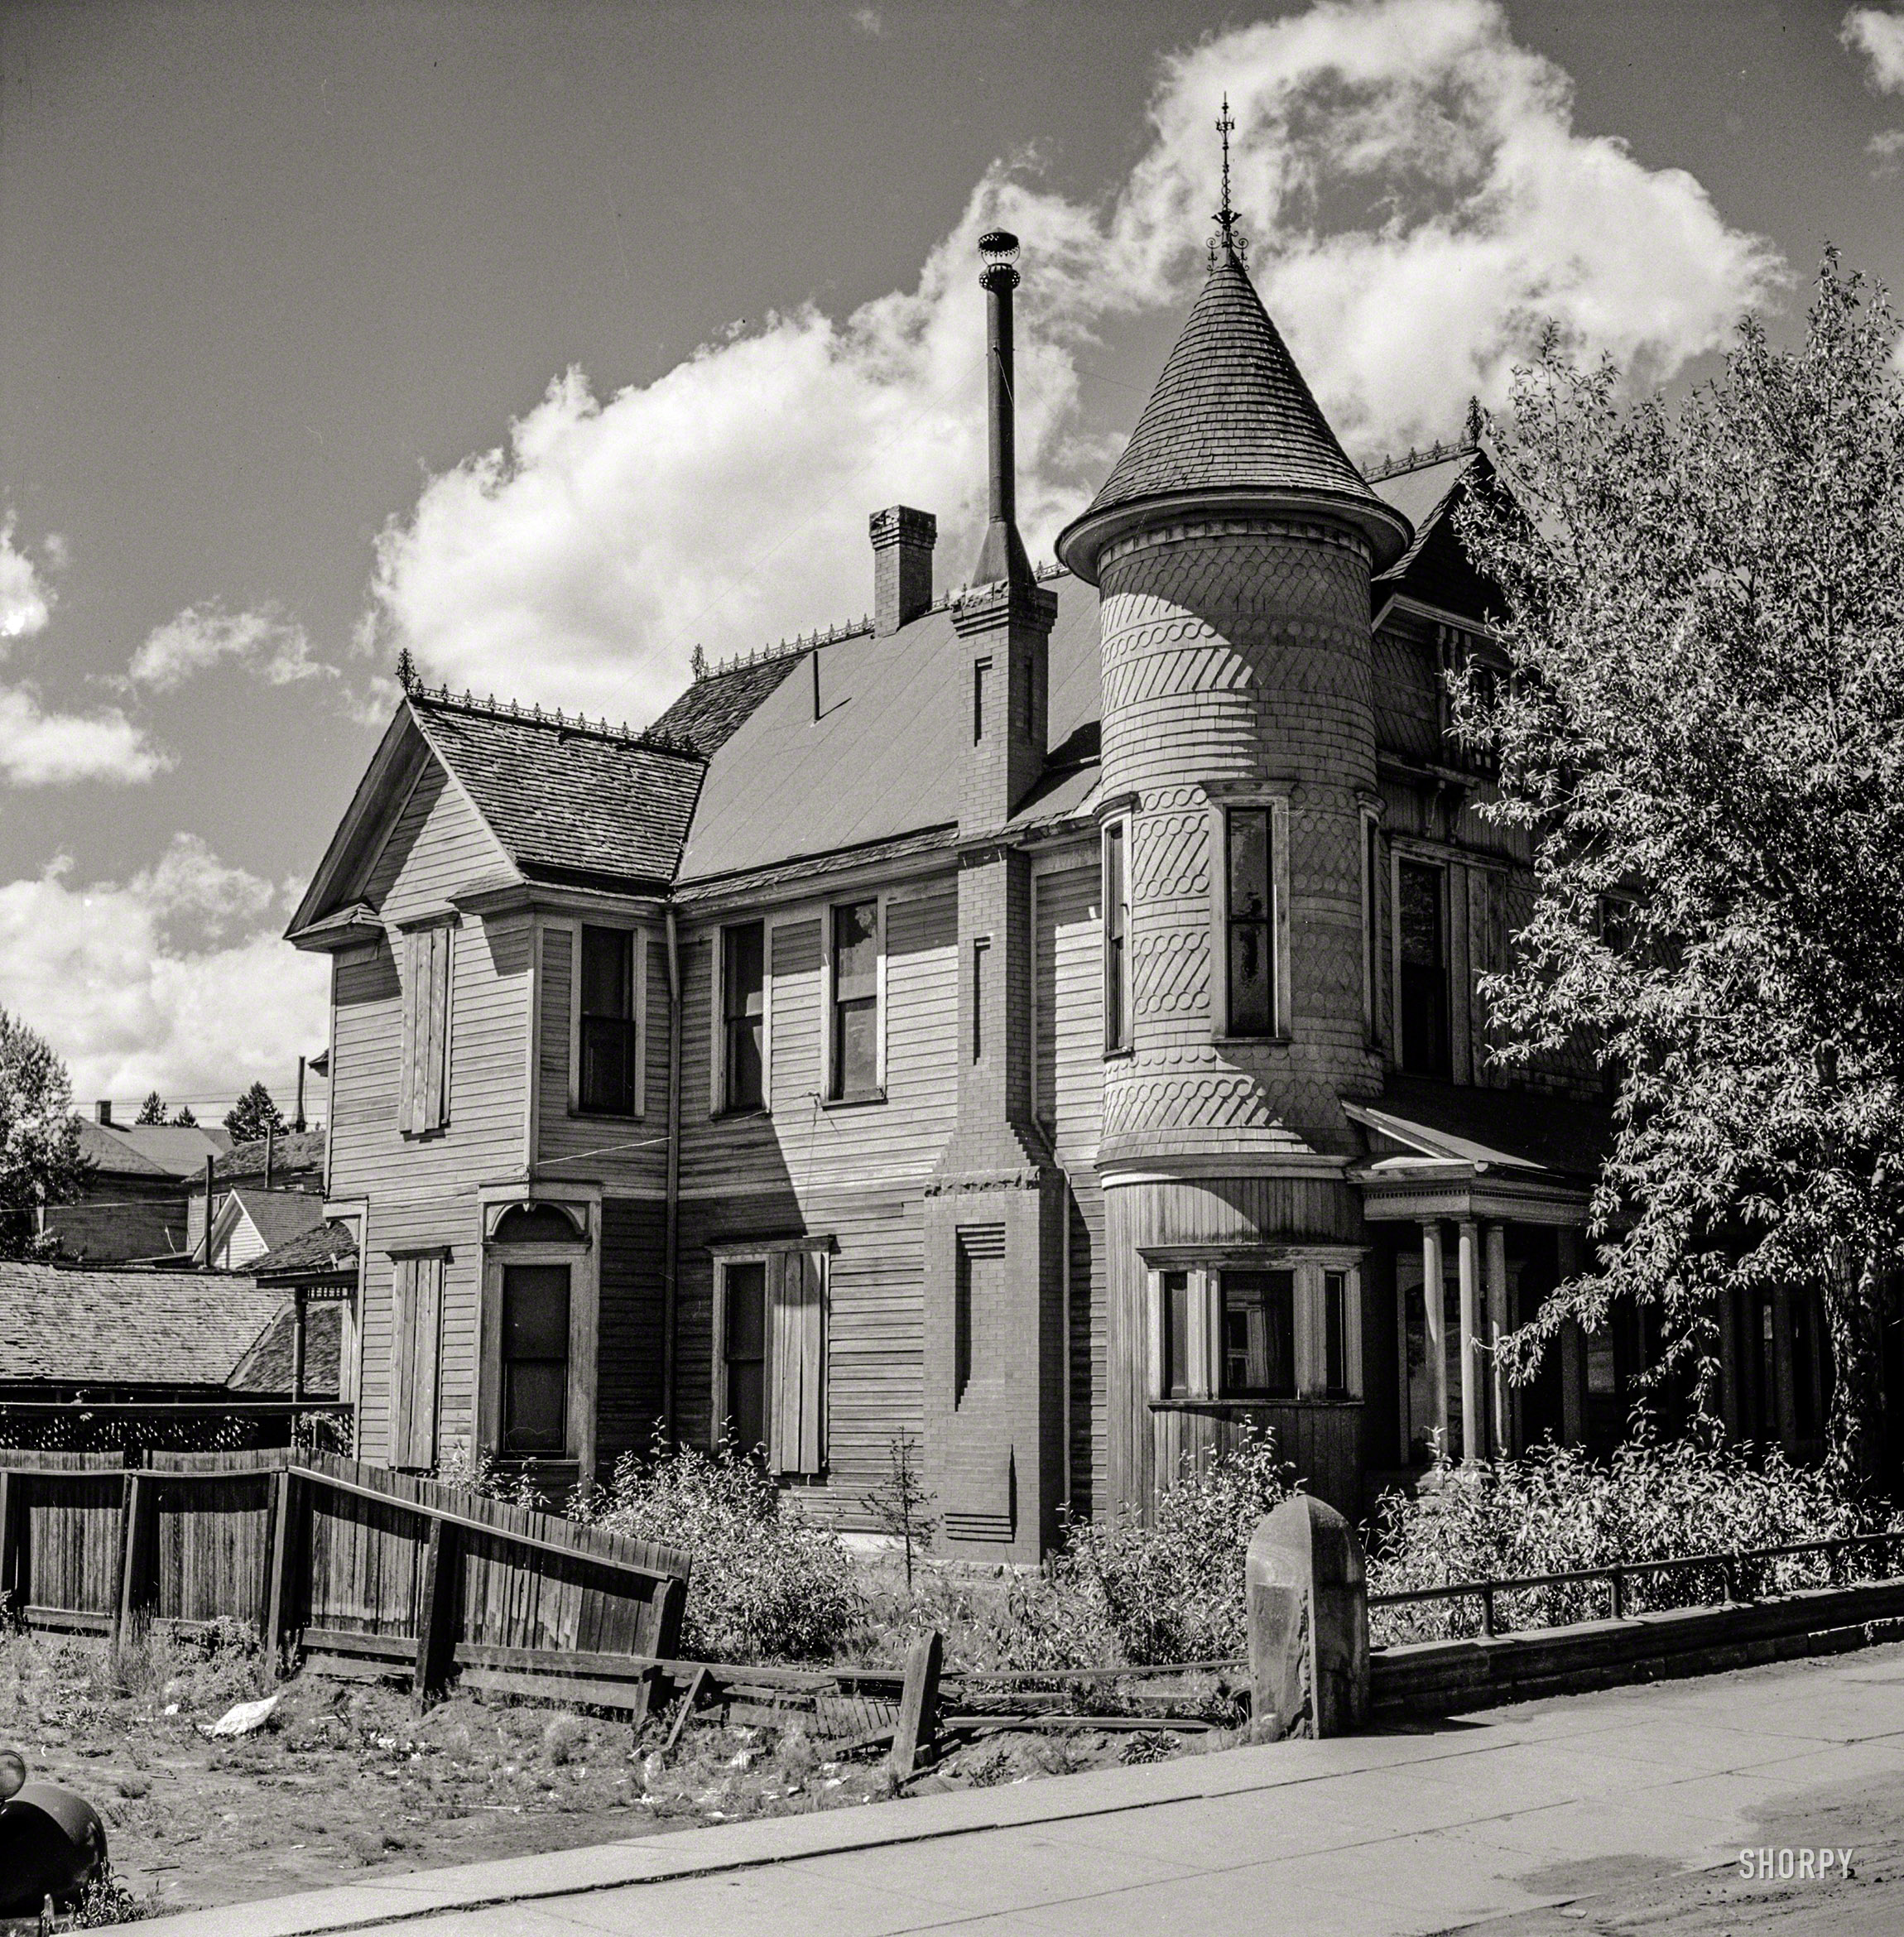 September 1941. "House in old mining town. Leadville, Colorado." Photo by Marion Post Wolcott for the Farm Security Administration. View full size.